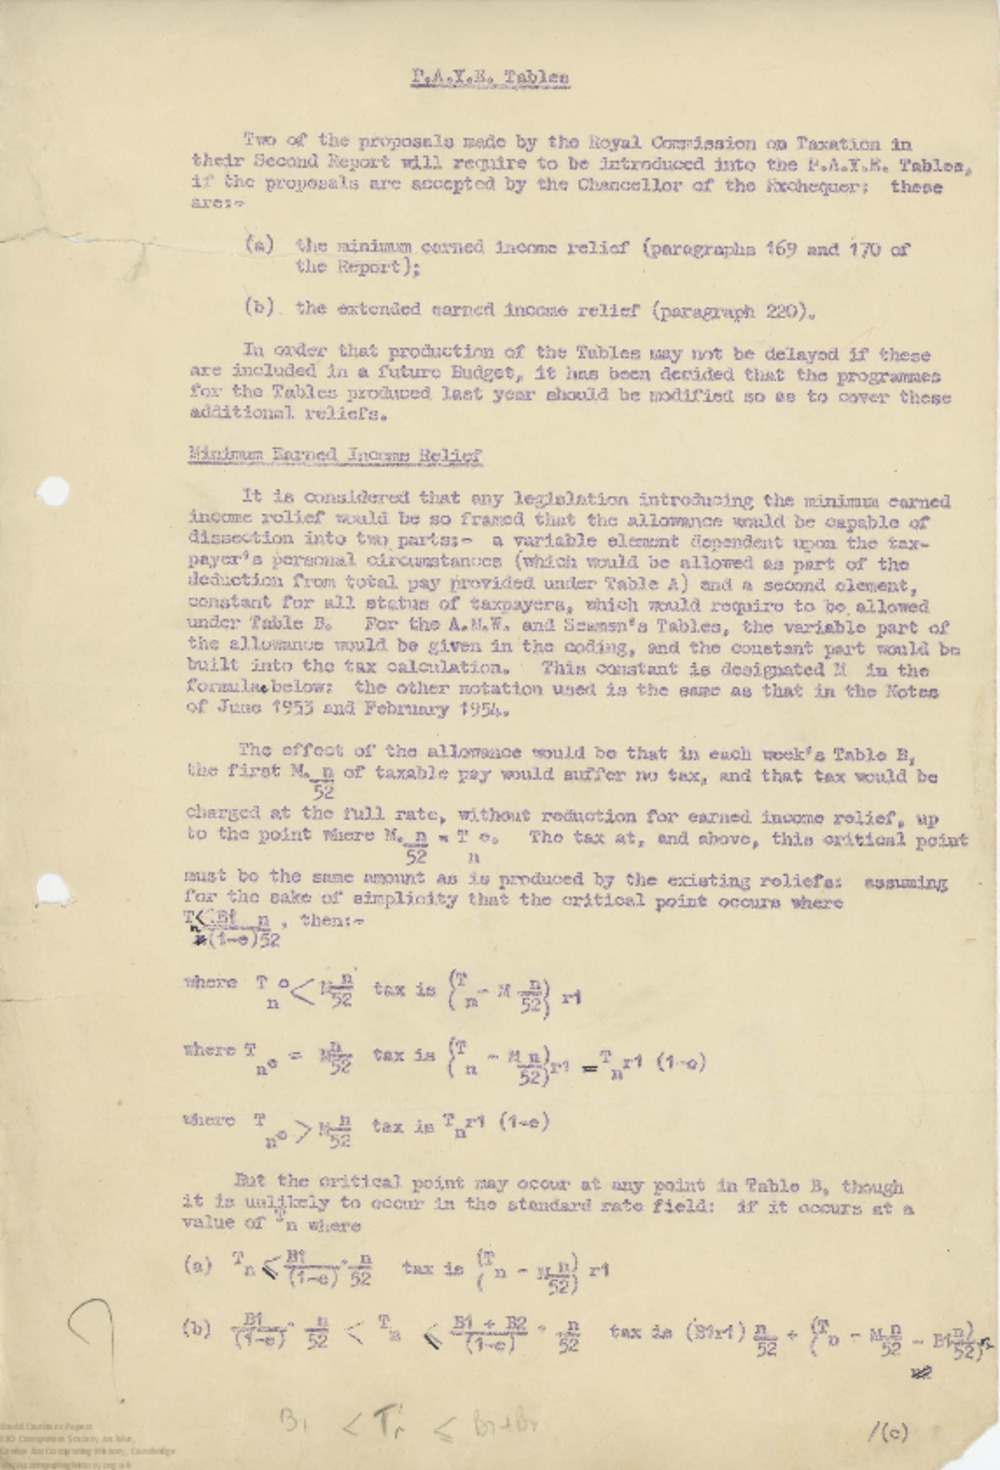 Article: 62932 Notes on PAYE Tables from the Inland Revenue, Nov-Dec 1954